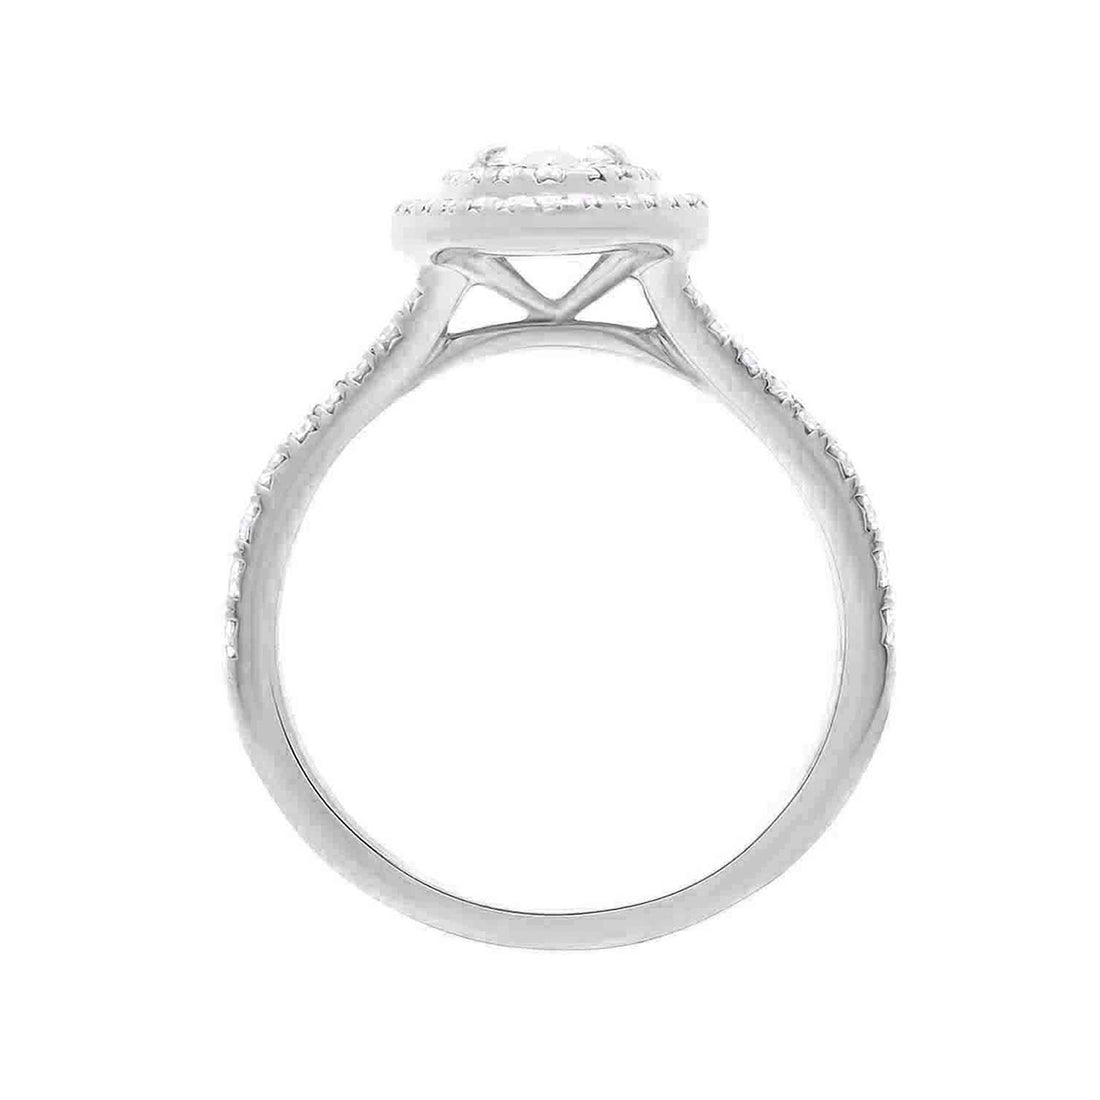 Double Halo Pear Diamond Ring made from white gold and diamonds, in an upright pose